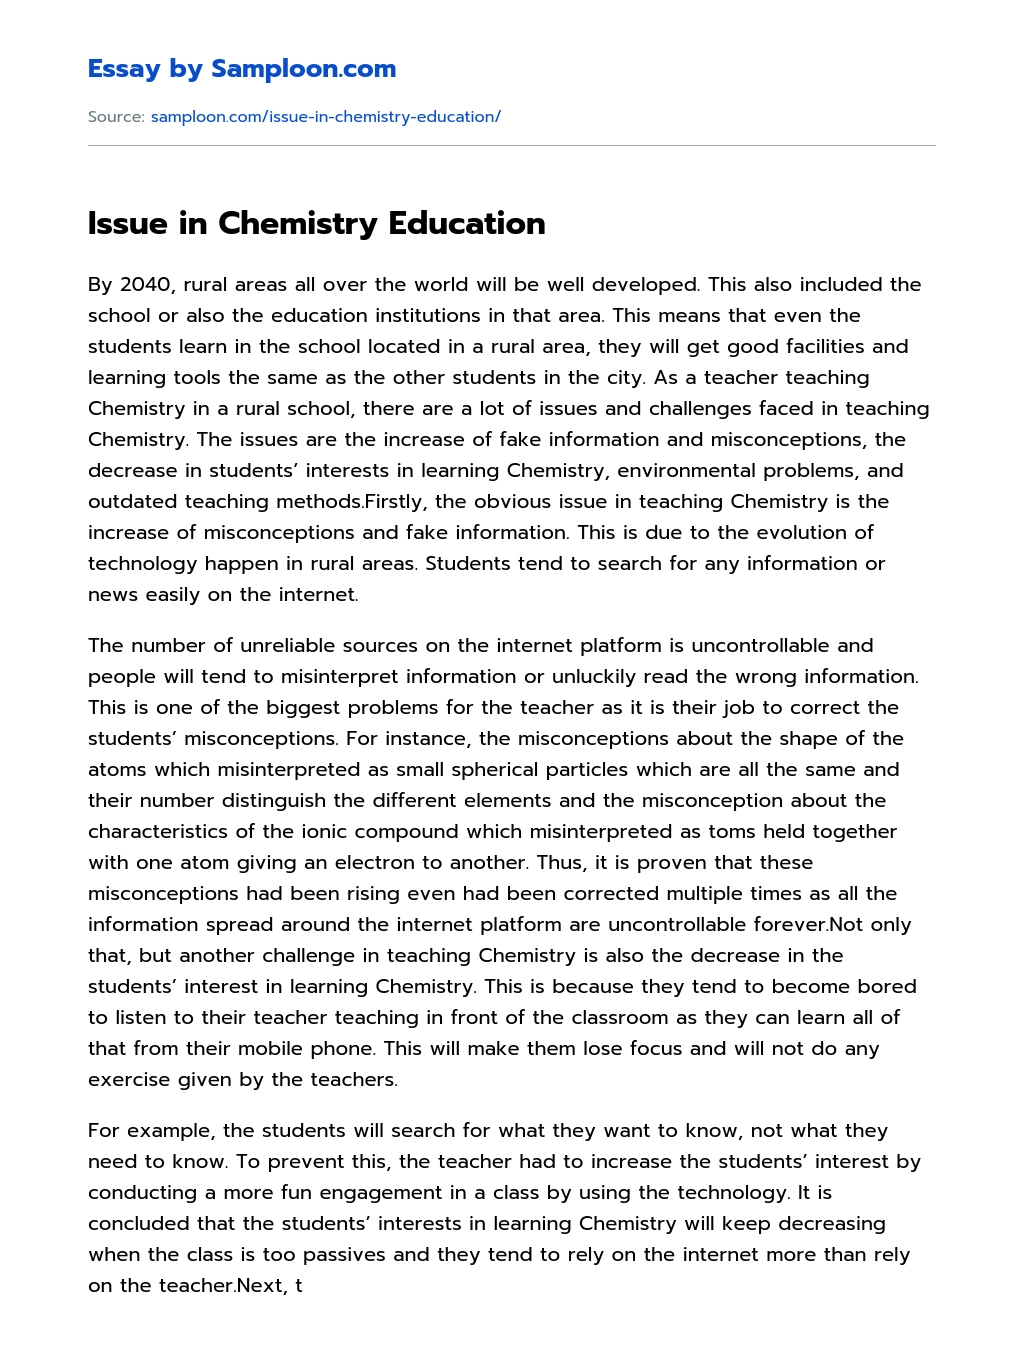 Issue in Chemistry Education essay